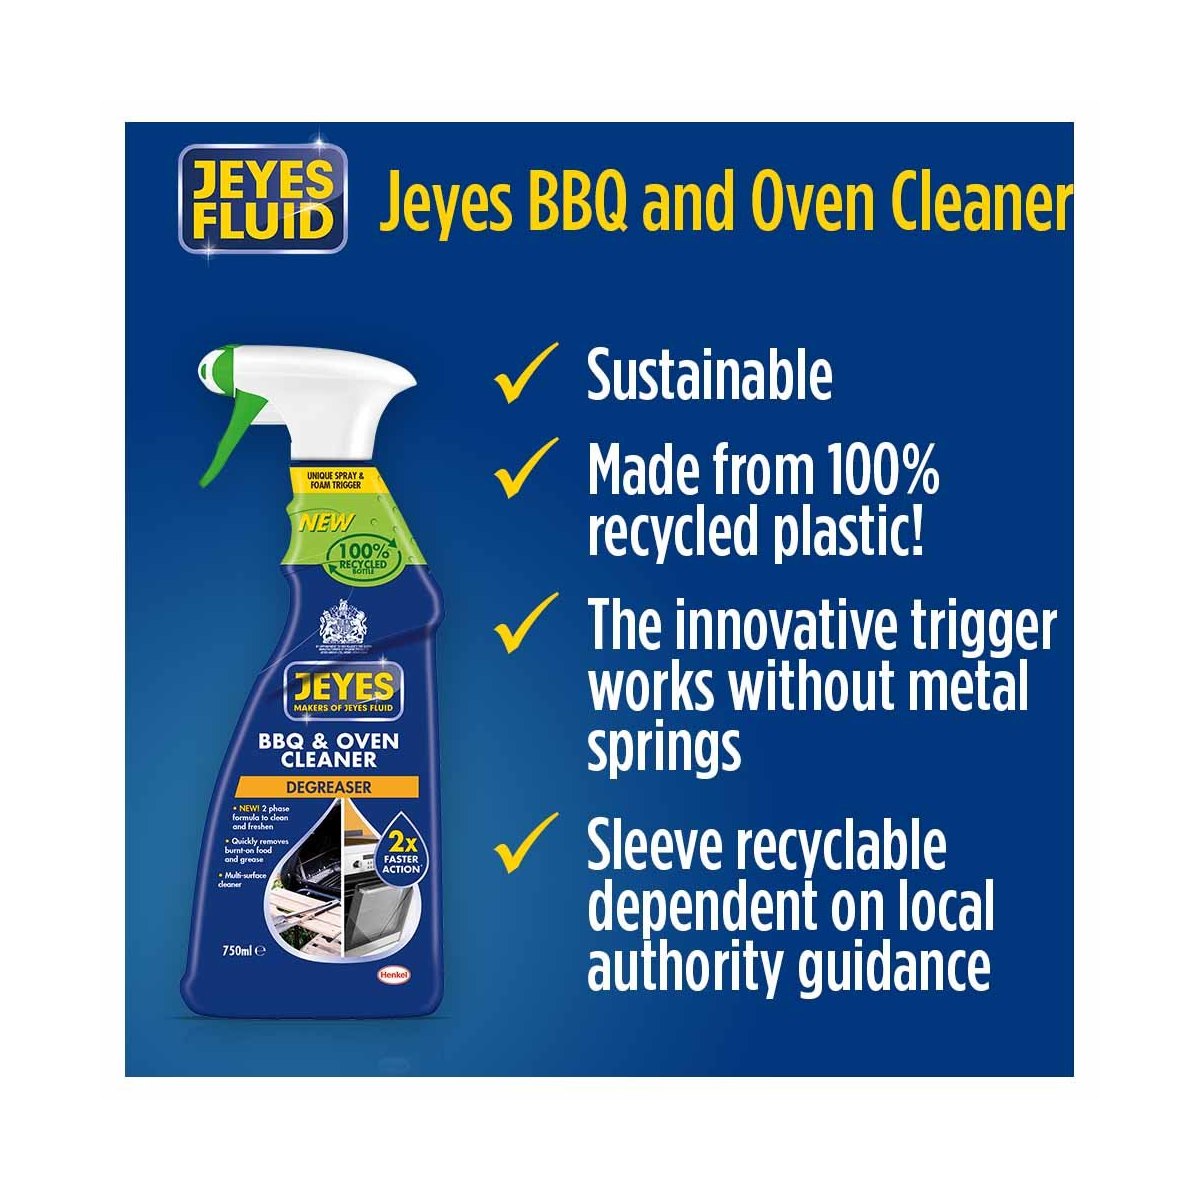 Jeyes BBQ and Oven Cleaner